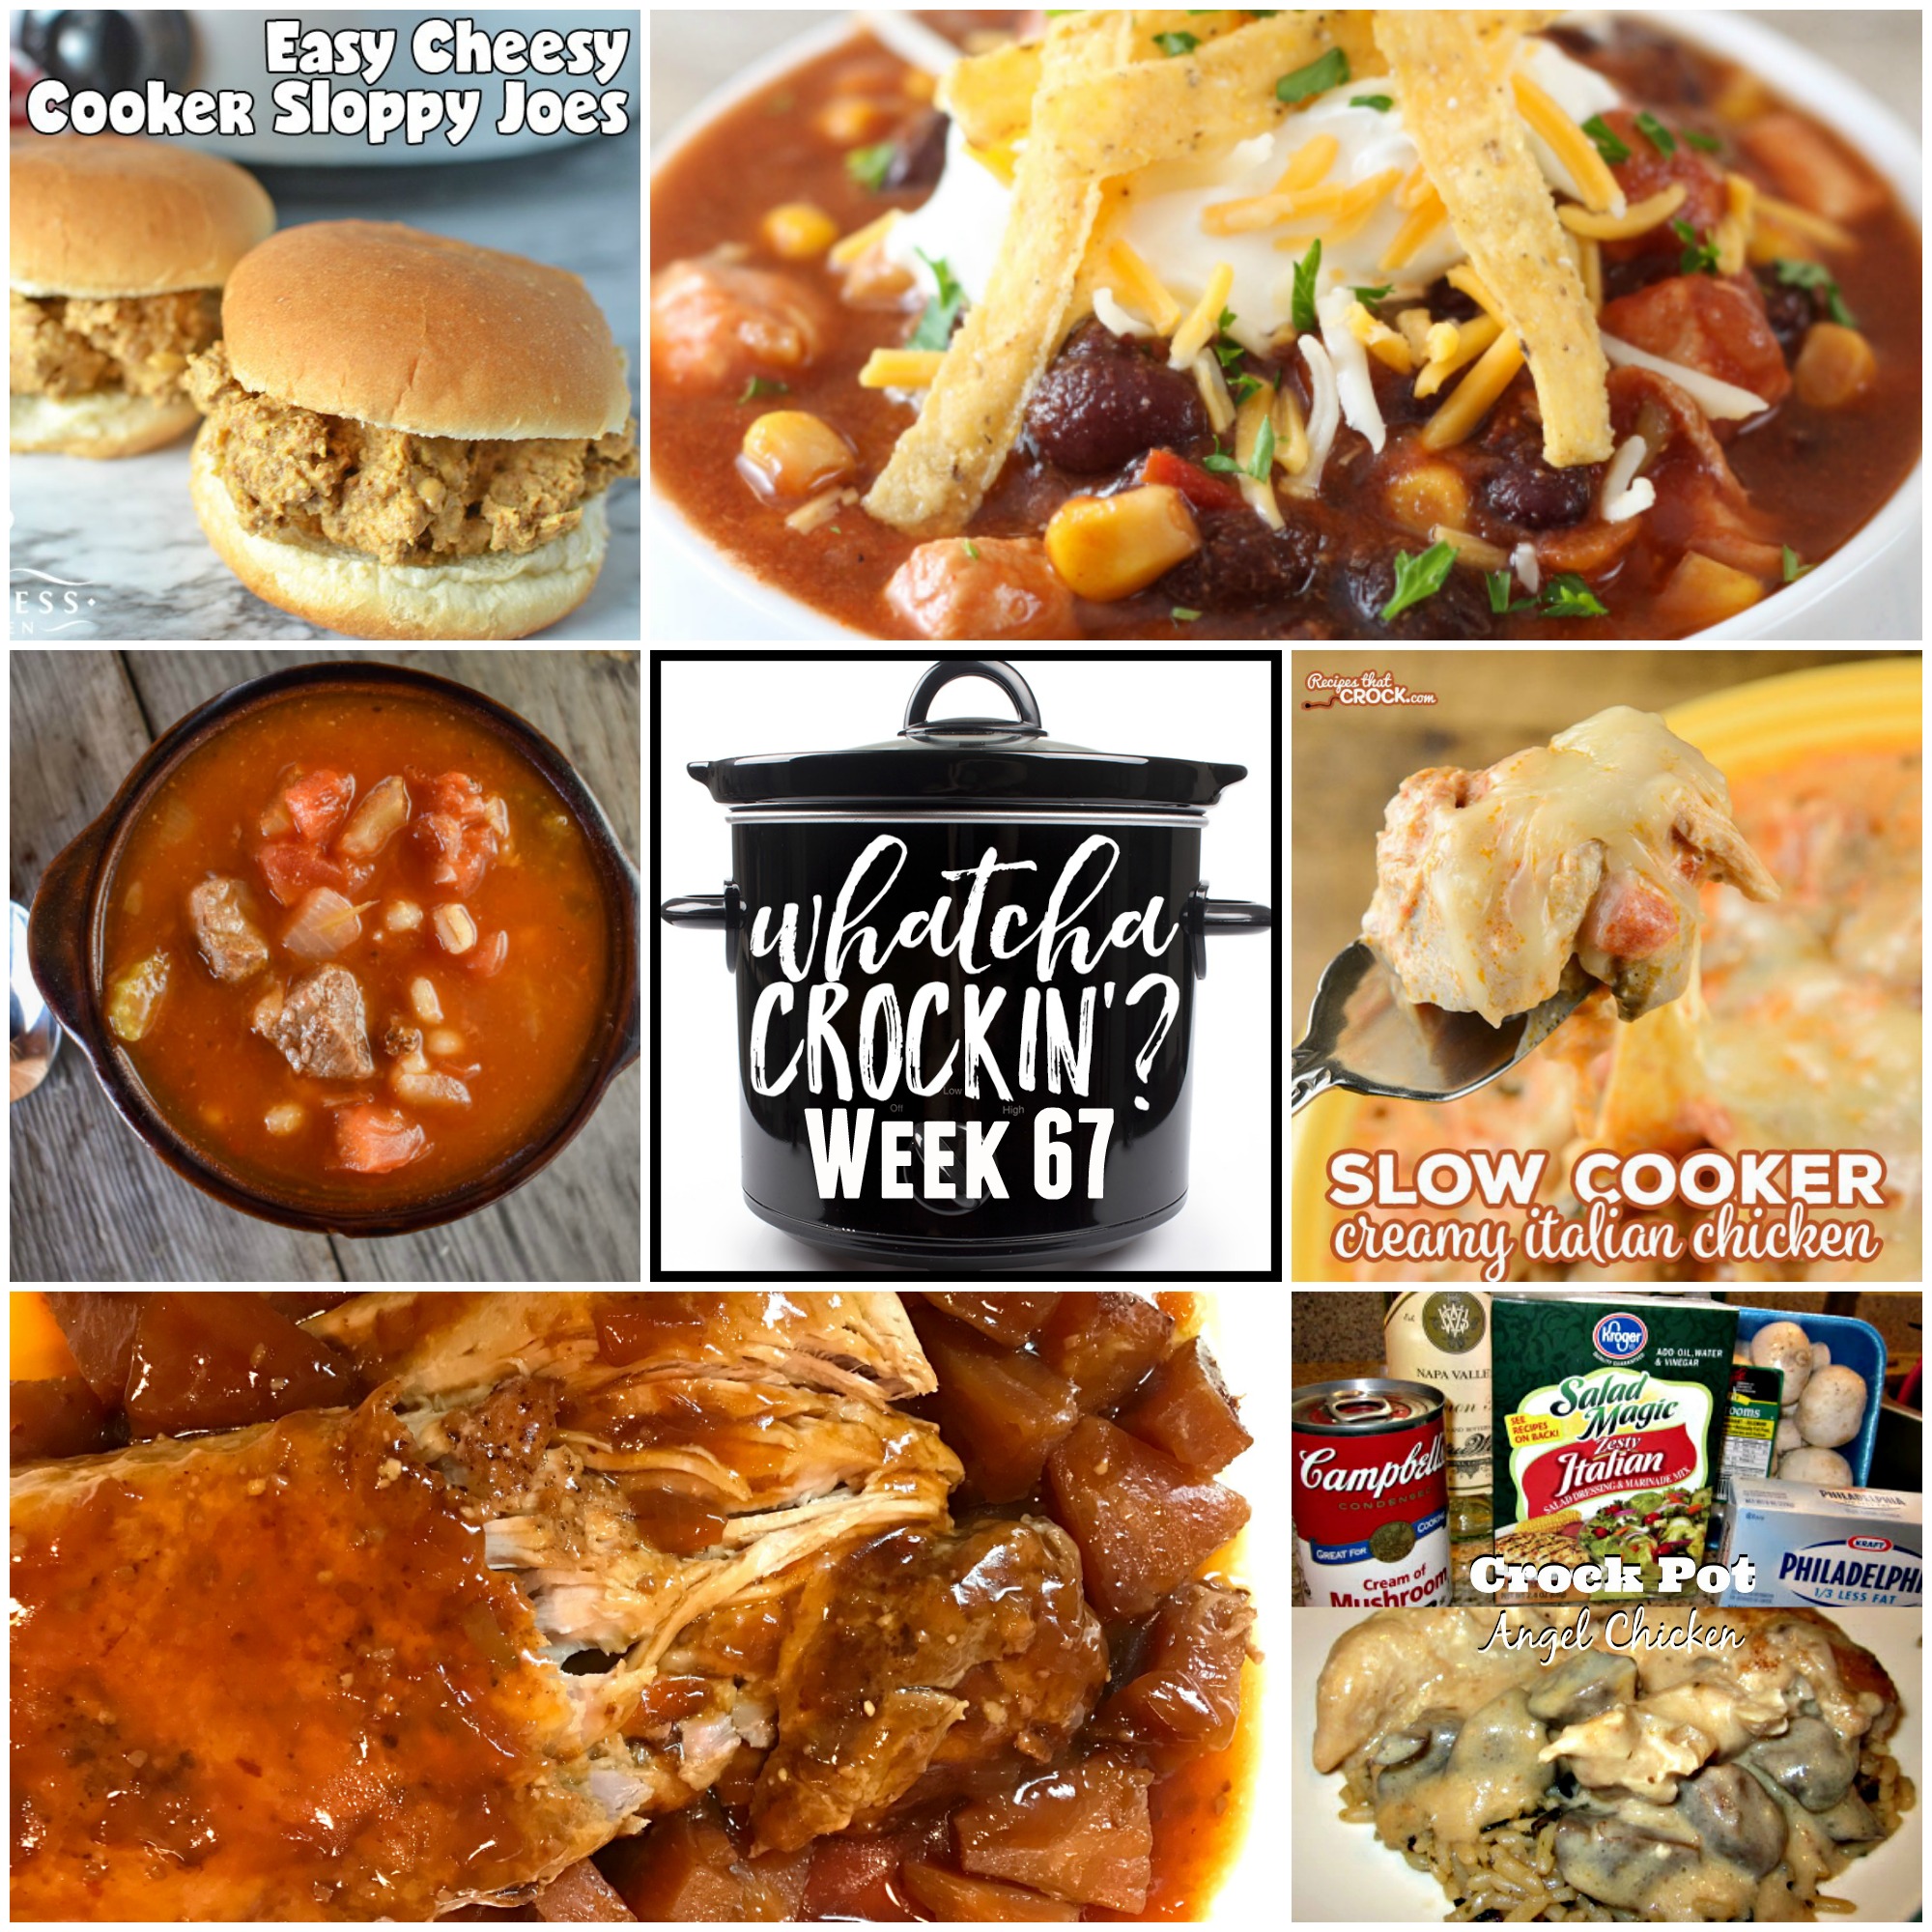 Crock Pot Sweet and Sour Pork Loin with Pineapple – WCW – Week 67